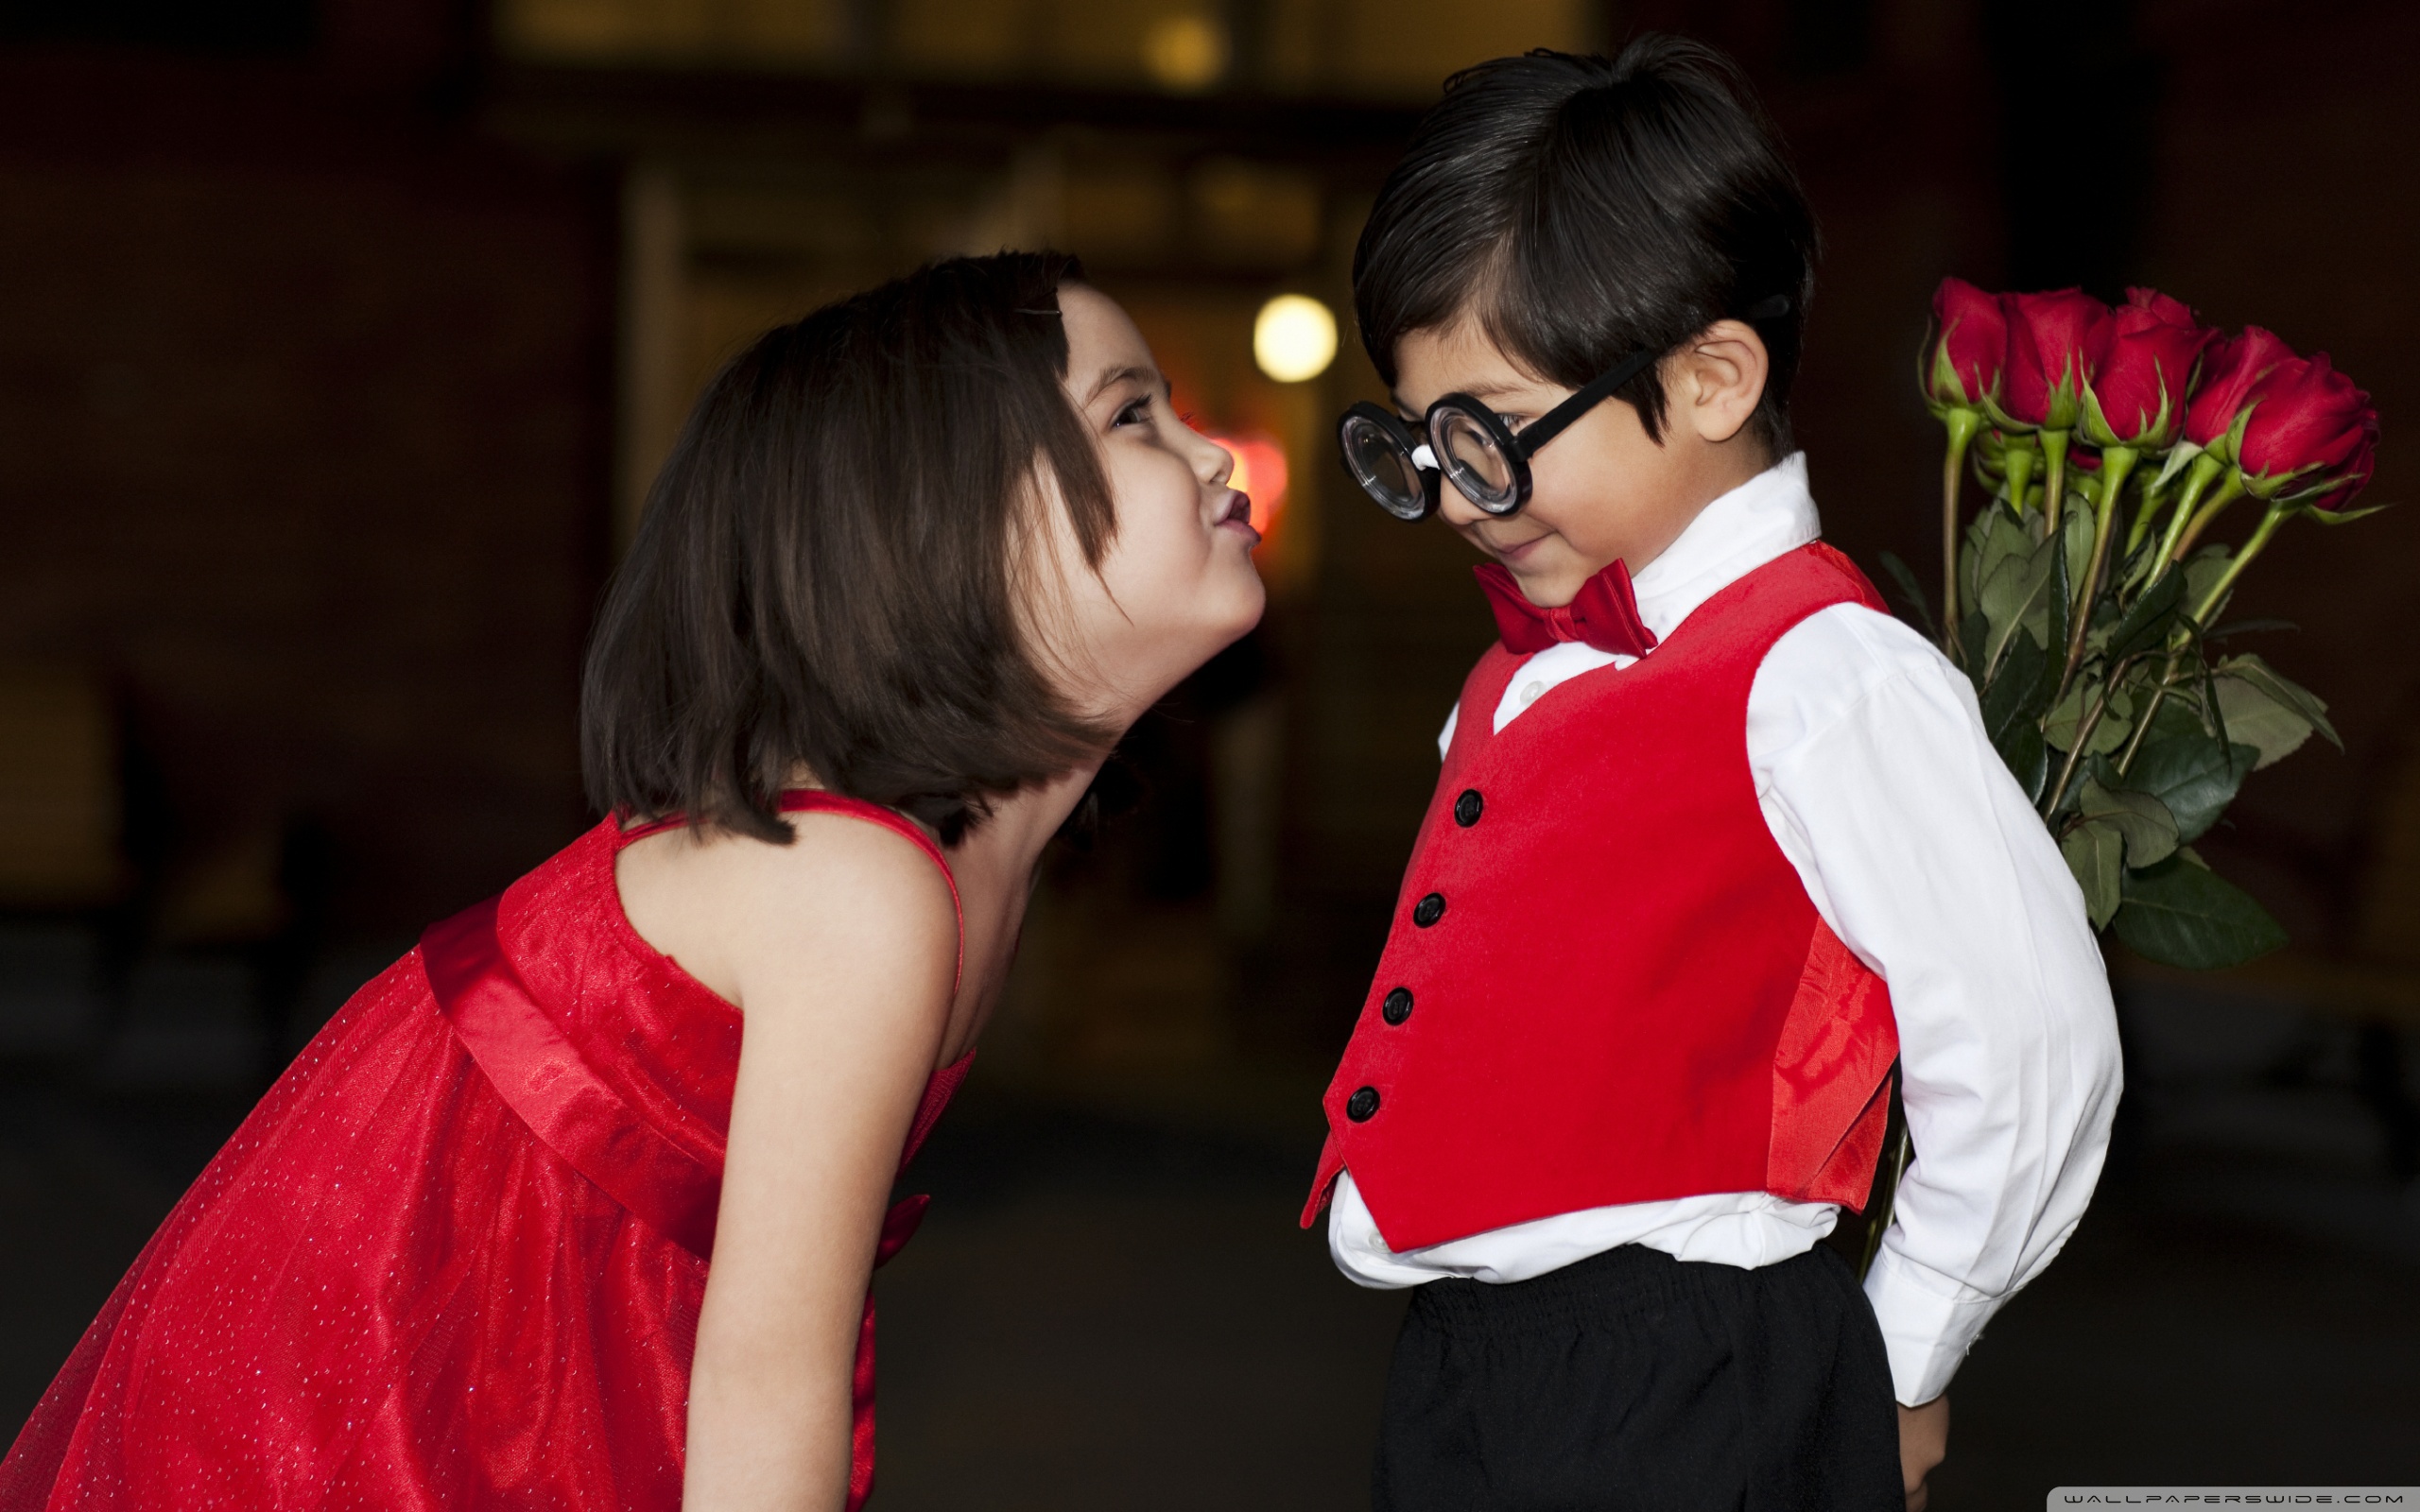 Boys And Girls Love Wallpaper Glasses, Cute Couple, - Hd Photo Love Baby -  2560x1600 Wallpaper 